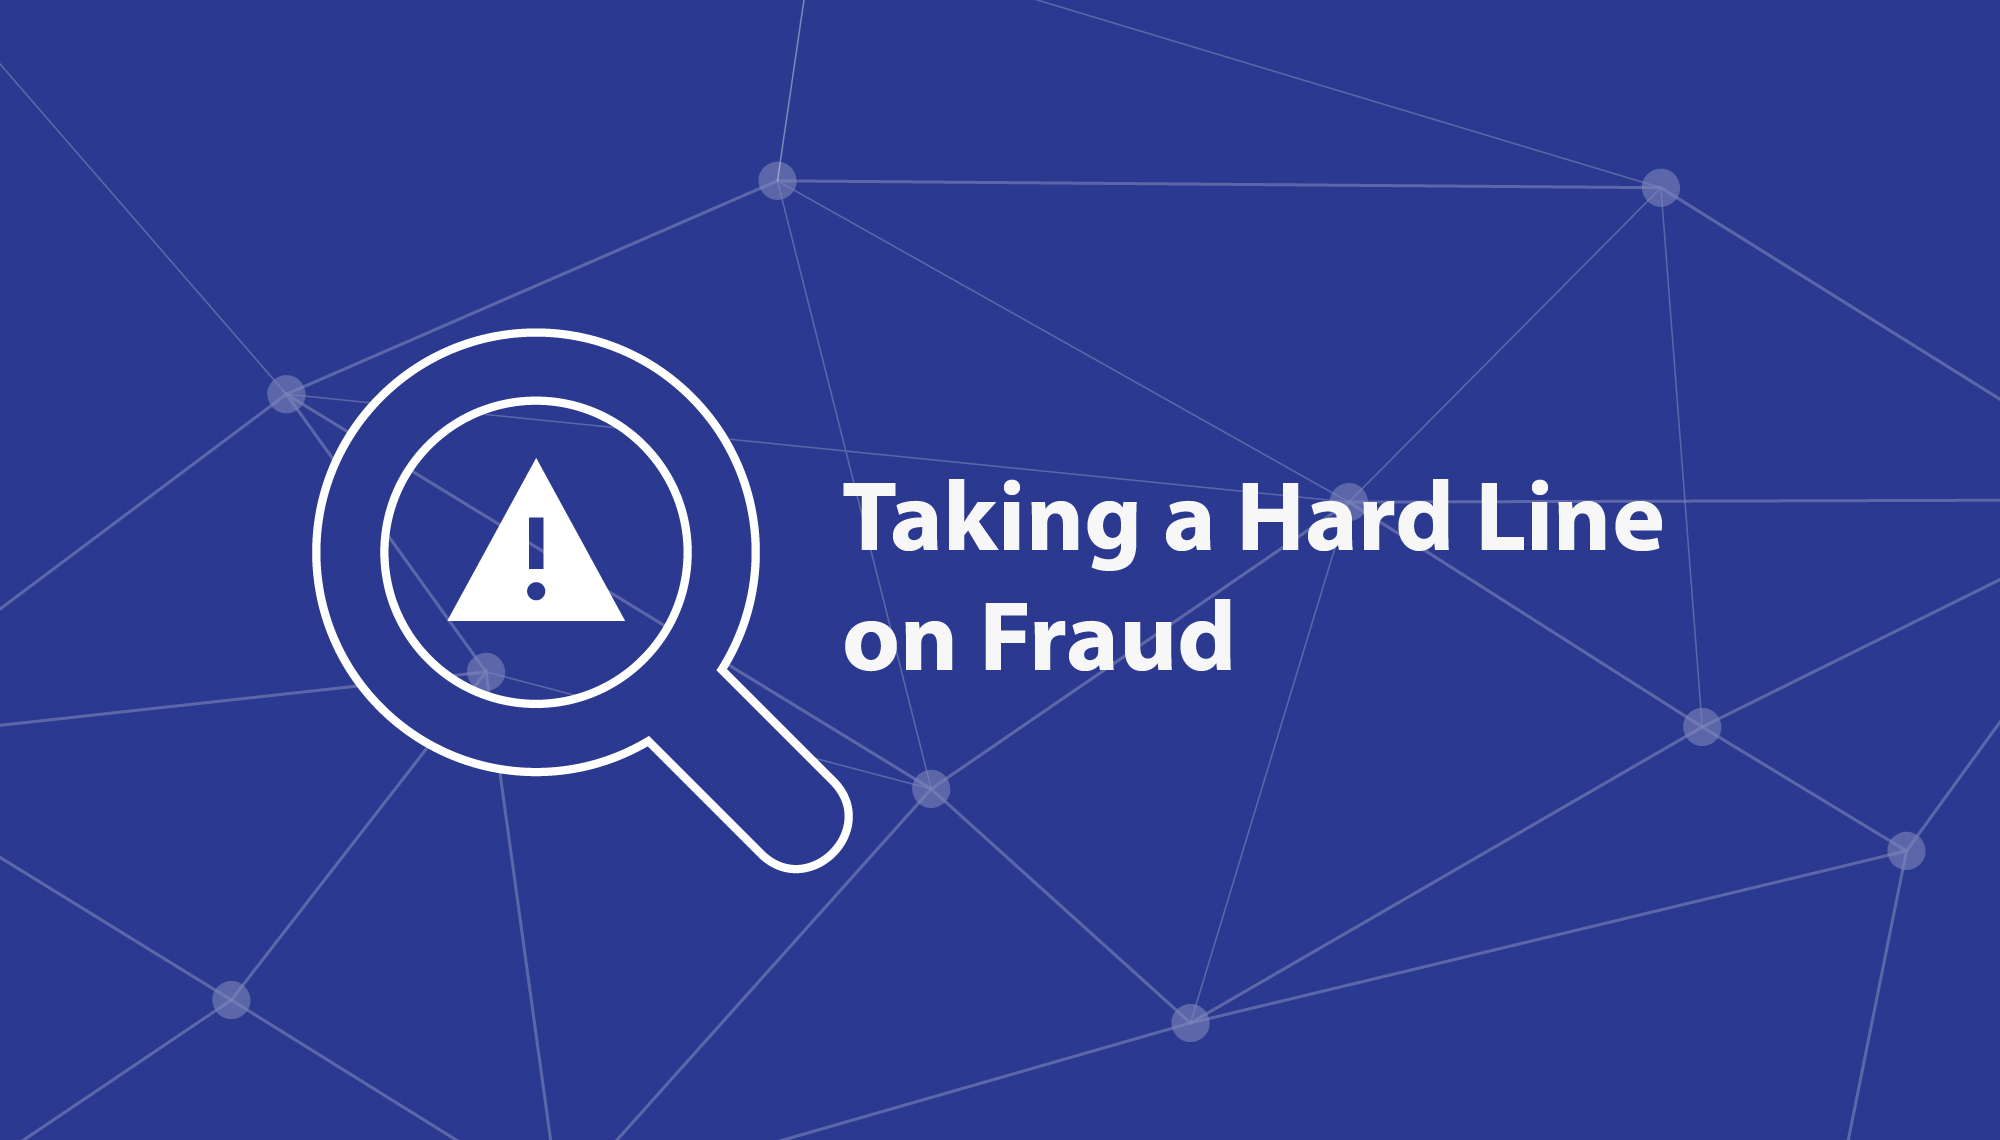 Taking a Hard Line on Fraud